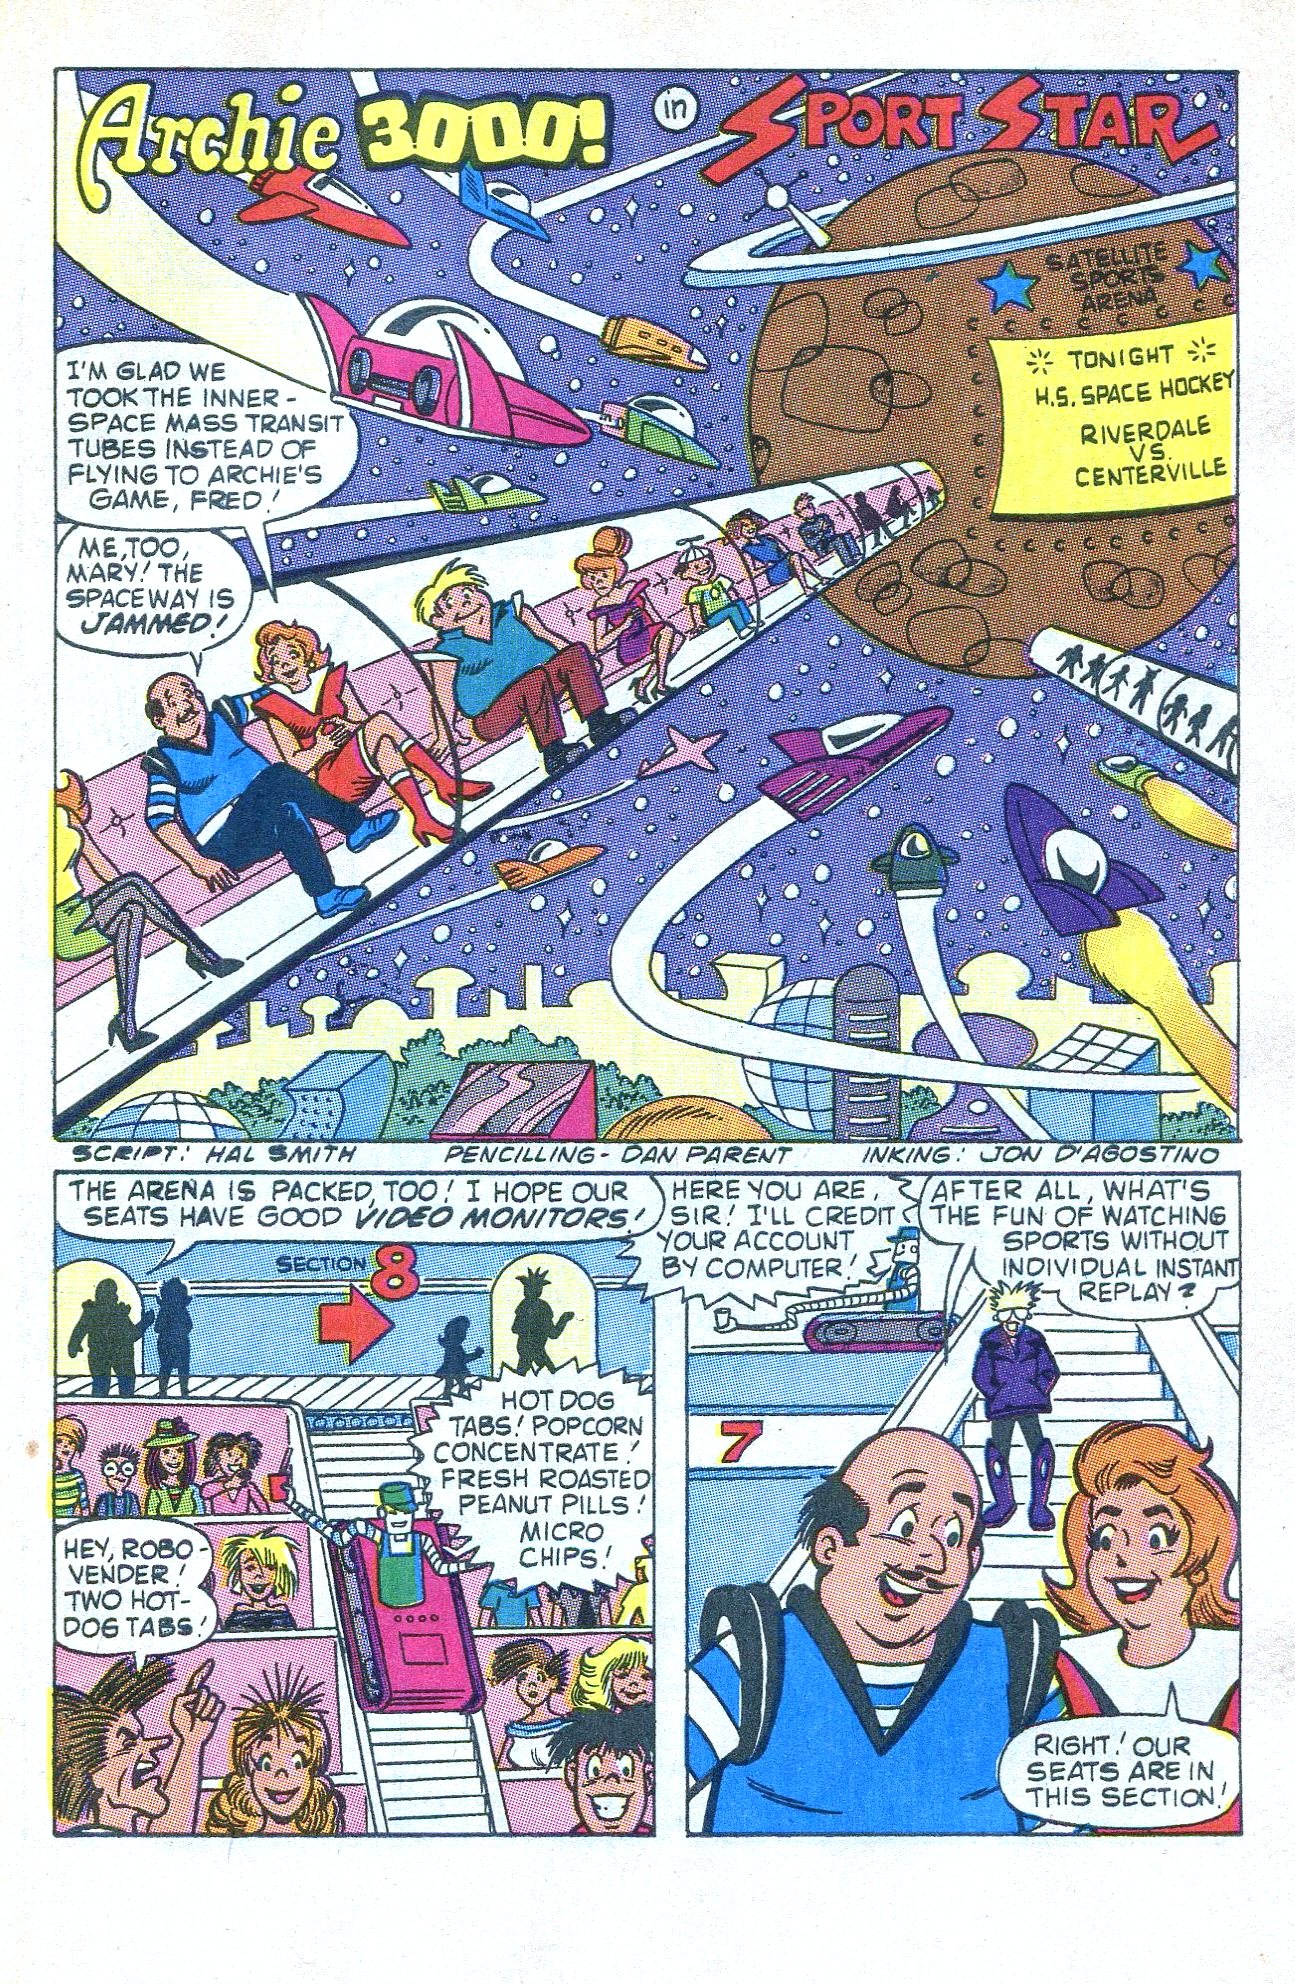 Read online Archie 3000! (1989) comic -  Issue #3 - 27